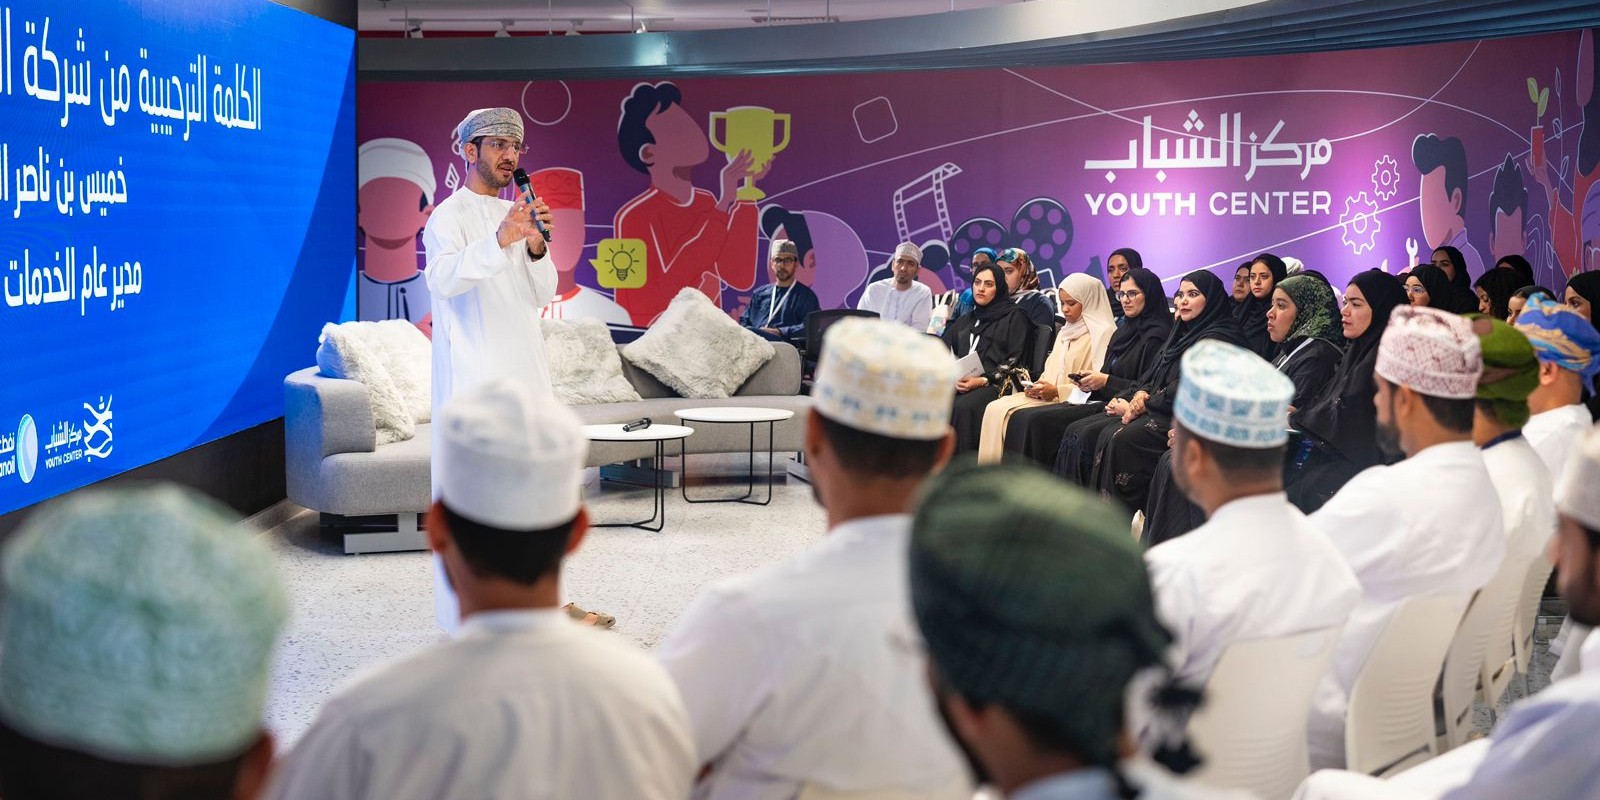 OOMCO AND YOUTH CENTER SUPPORT YOUNG OMANI PEOPLE TO START THEIR OWN BUSINESS DURING FIRST TMAKON FORUM